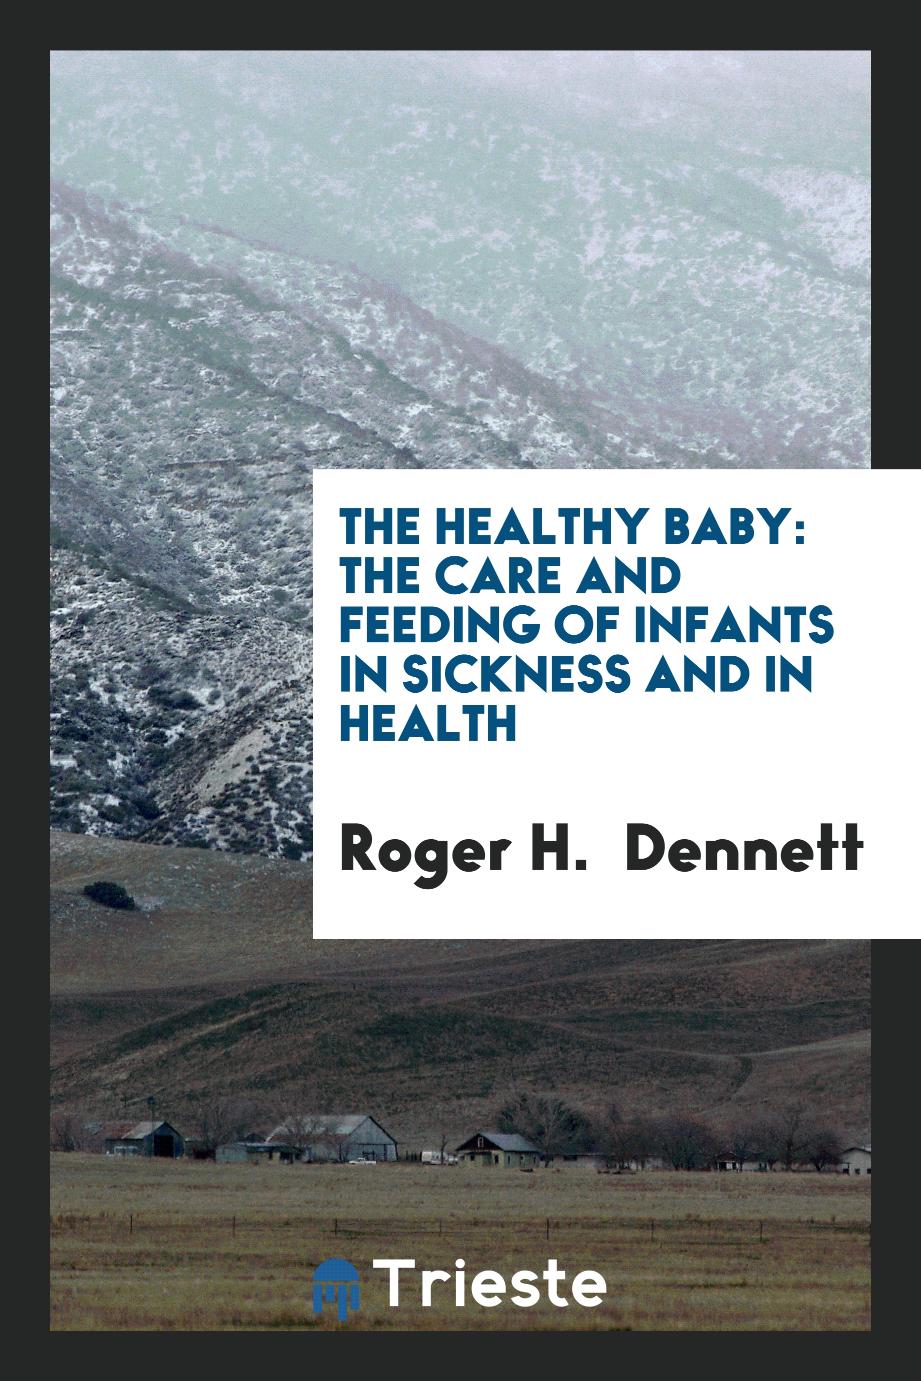 The Healthy Baby: The Care and Feeding of Infants in Sickness and in Health